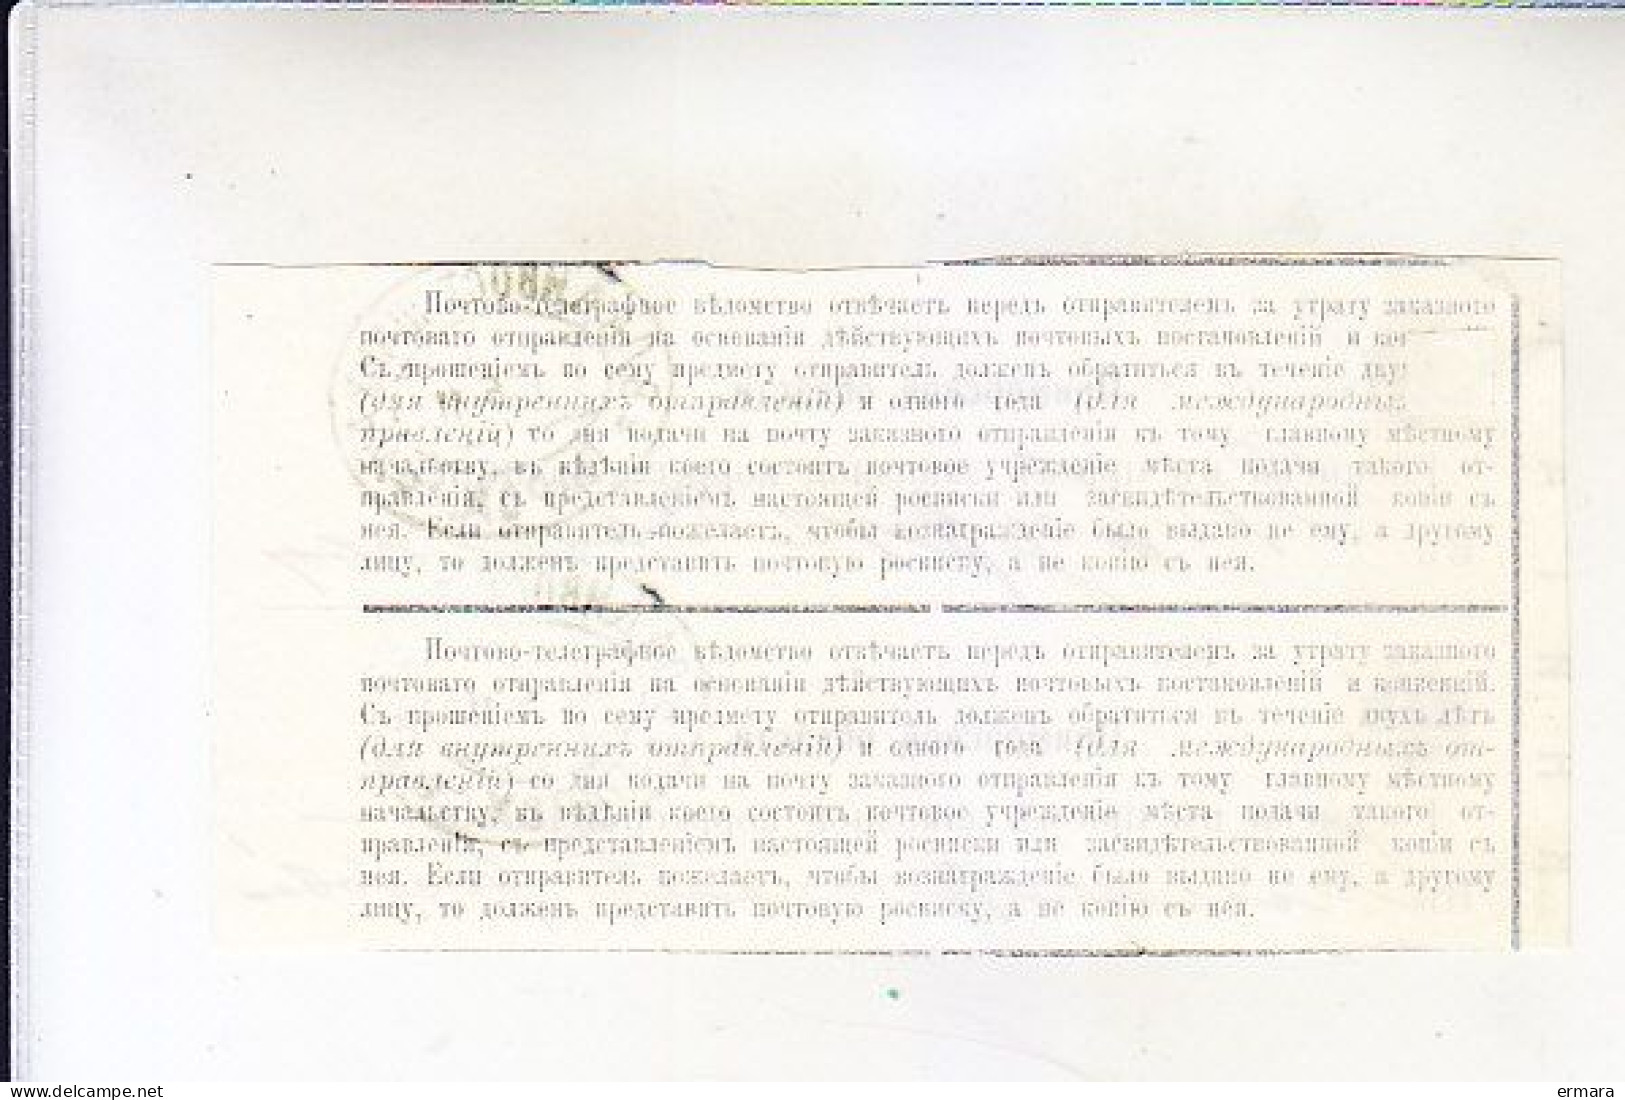 RECEIPTS FOR ACCEPTANCE OF REGISTERED CORRESPONDENCE (2 PCS.) STEAMSHIP MAIL STEAMSHIP VLADIVOSTOK - SHANGHAI CHINA 1911 - Siberia And Far East